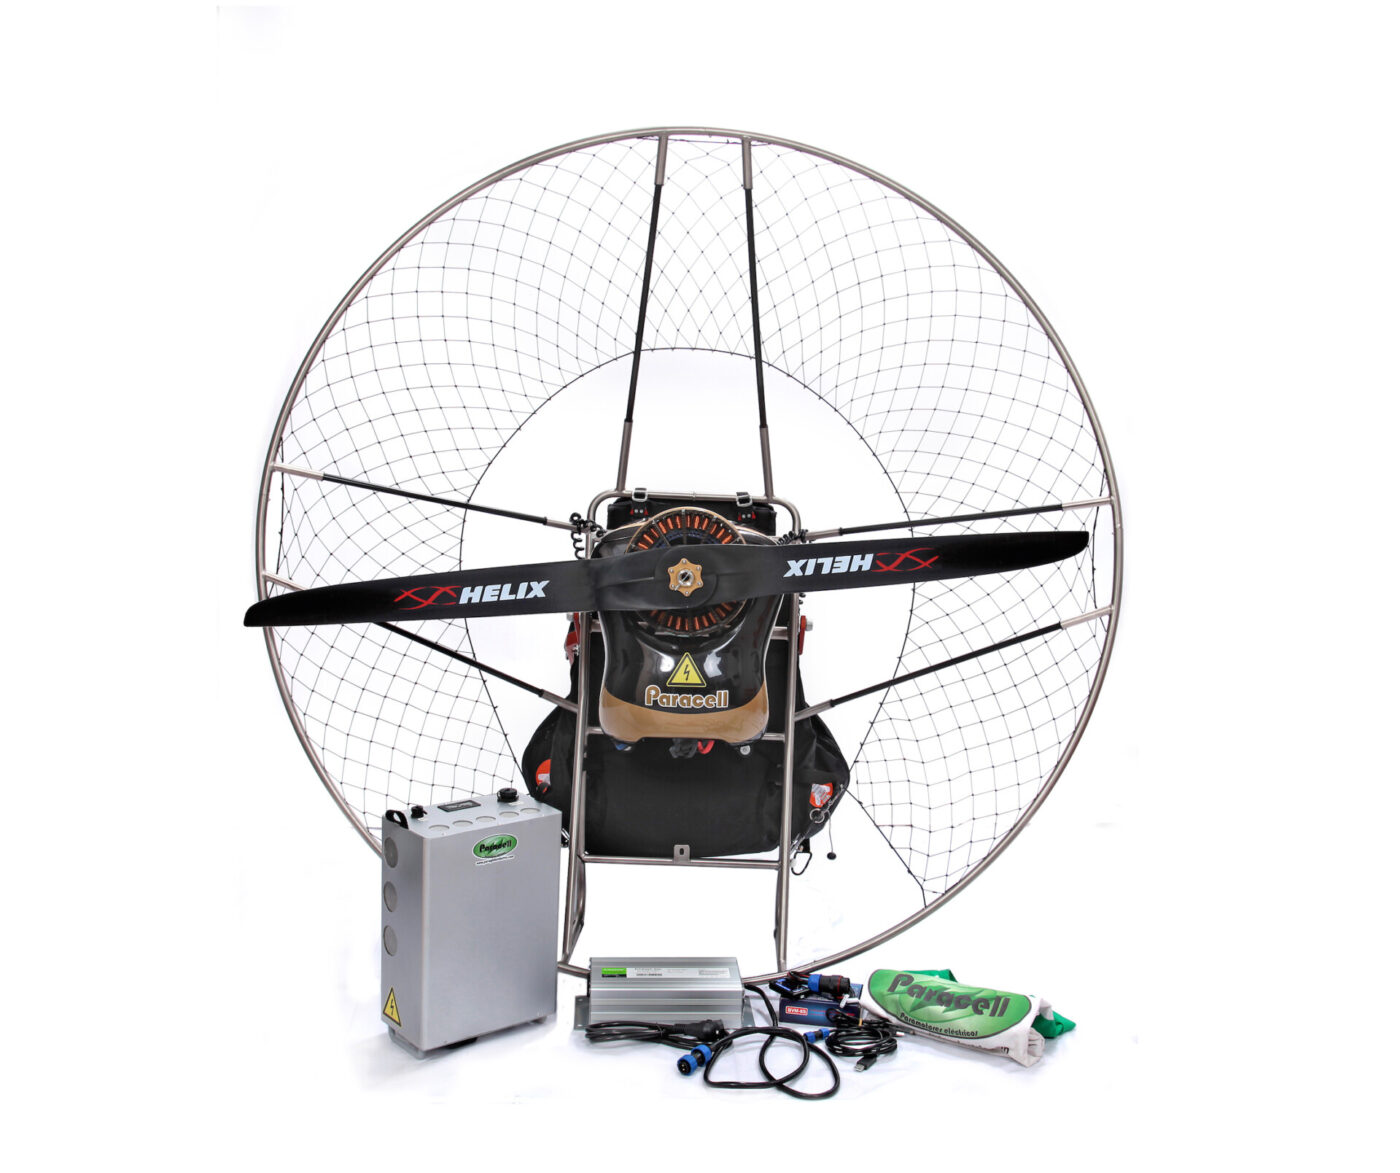 paracell paramotors cooperation with MGM COMPRO